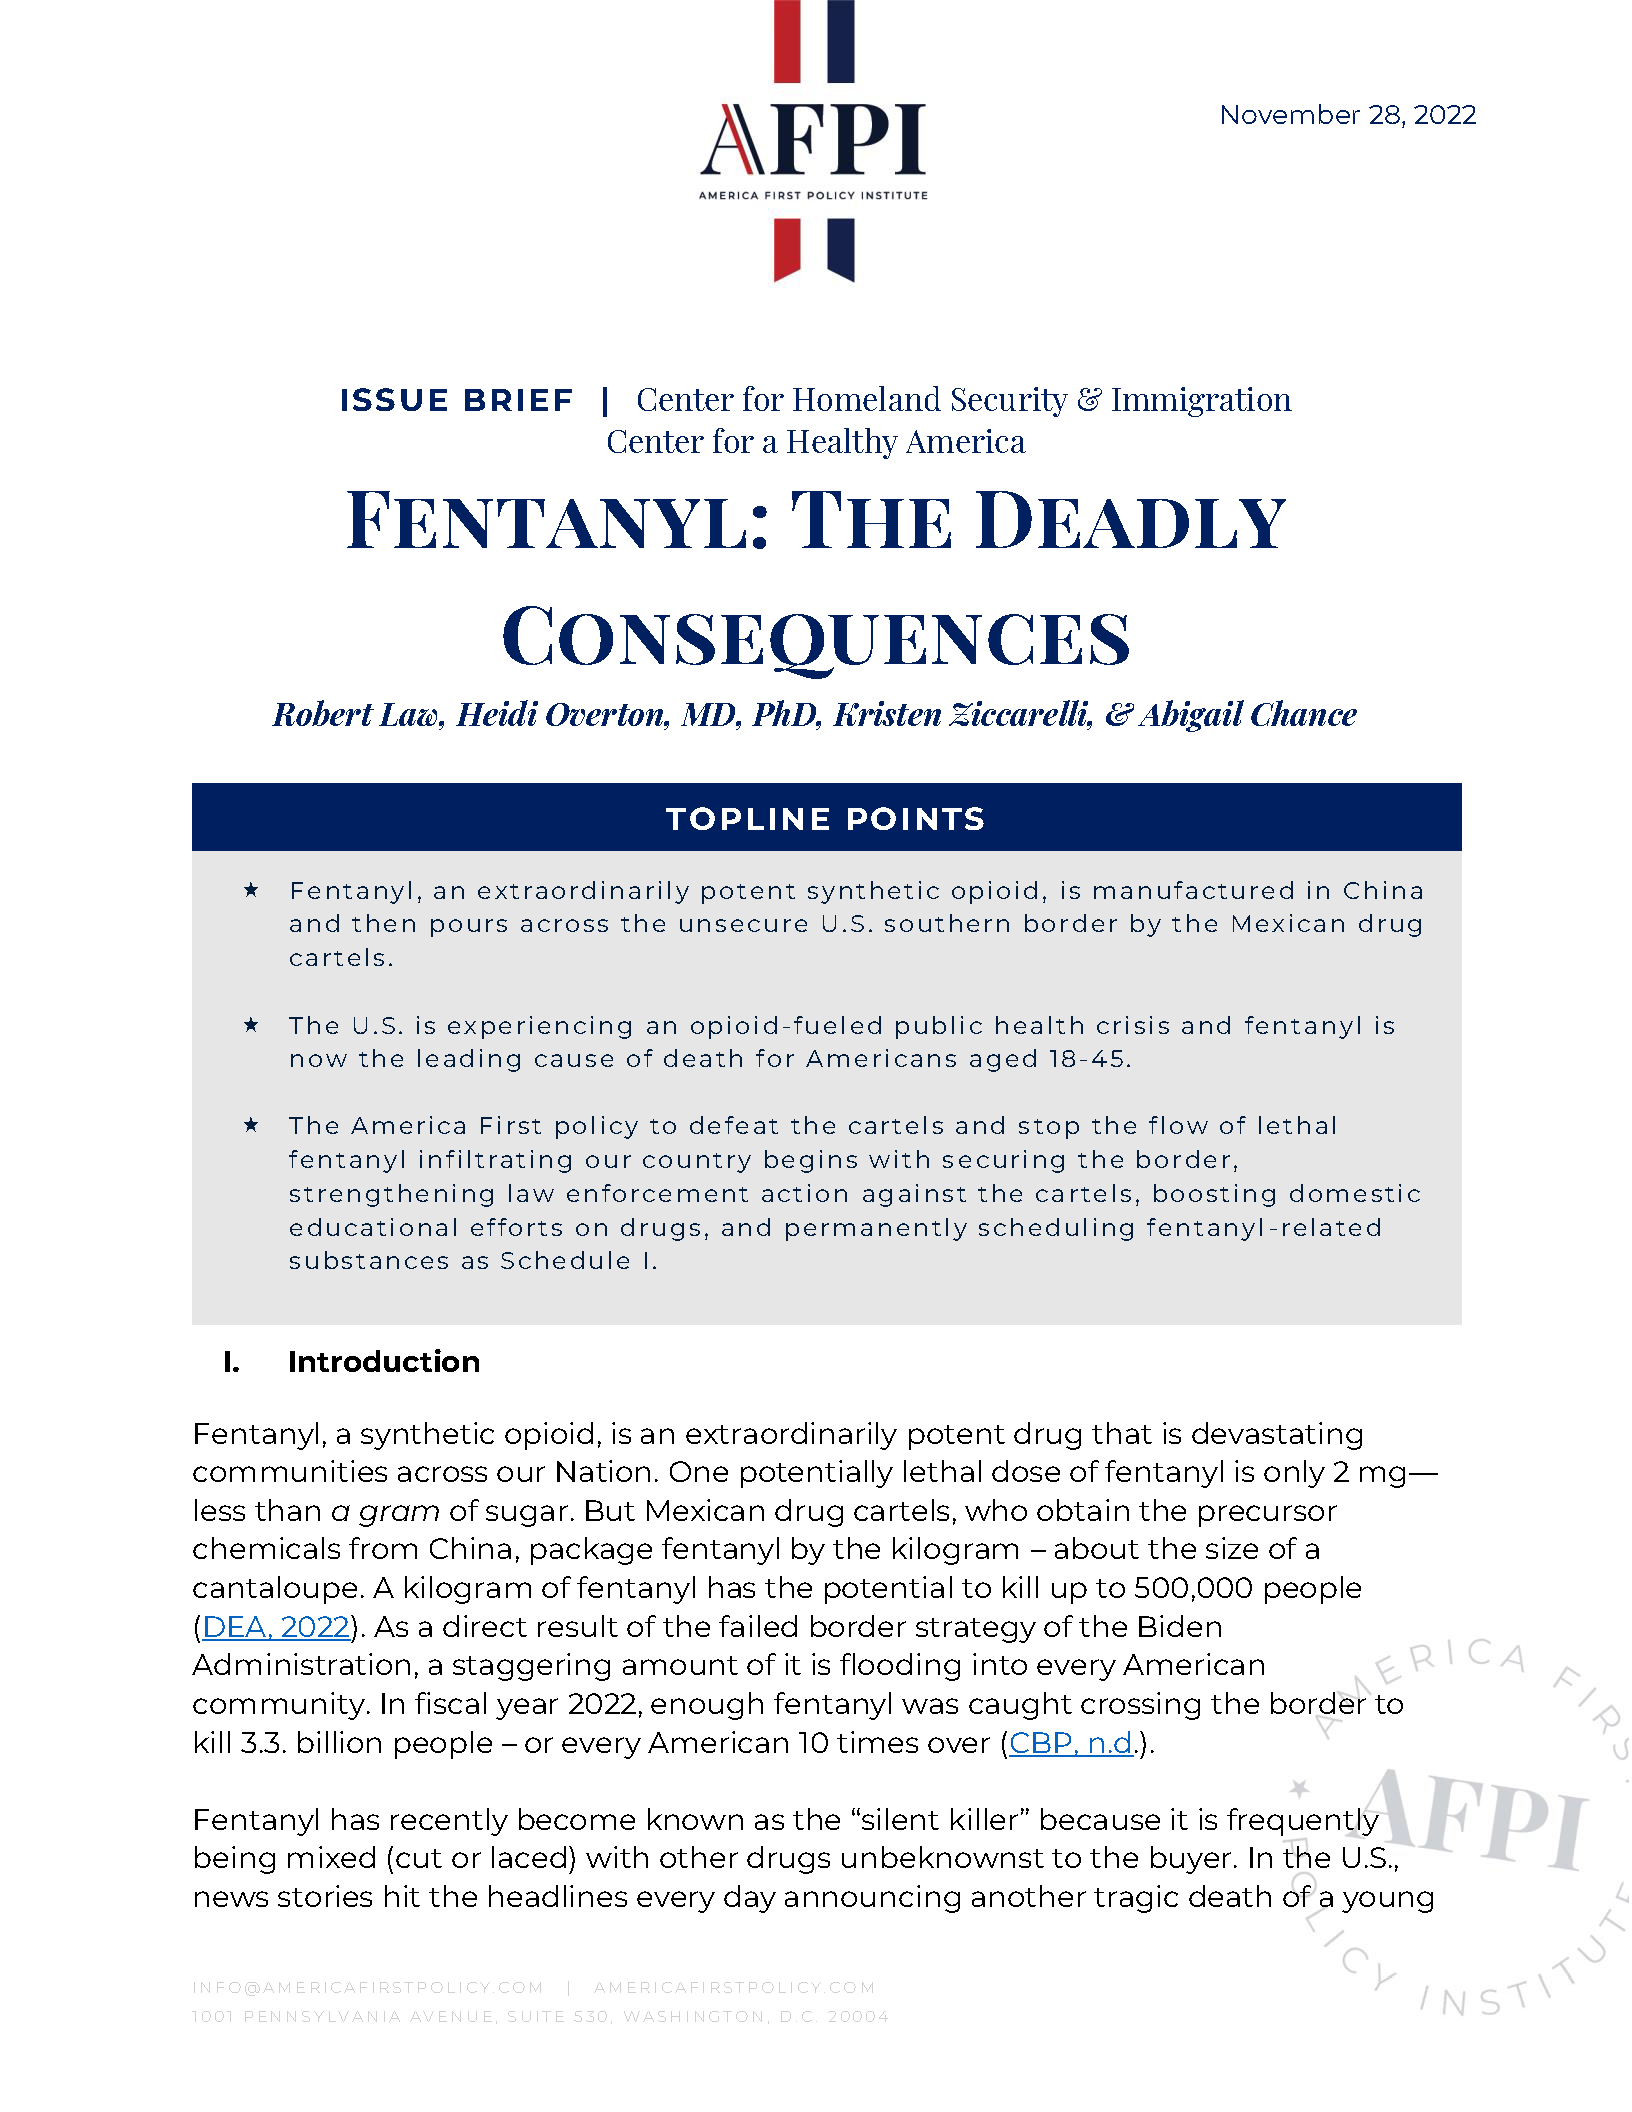 To the Point: The Fentanyl Crisis, Why Now, Why So Deadly?